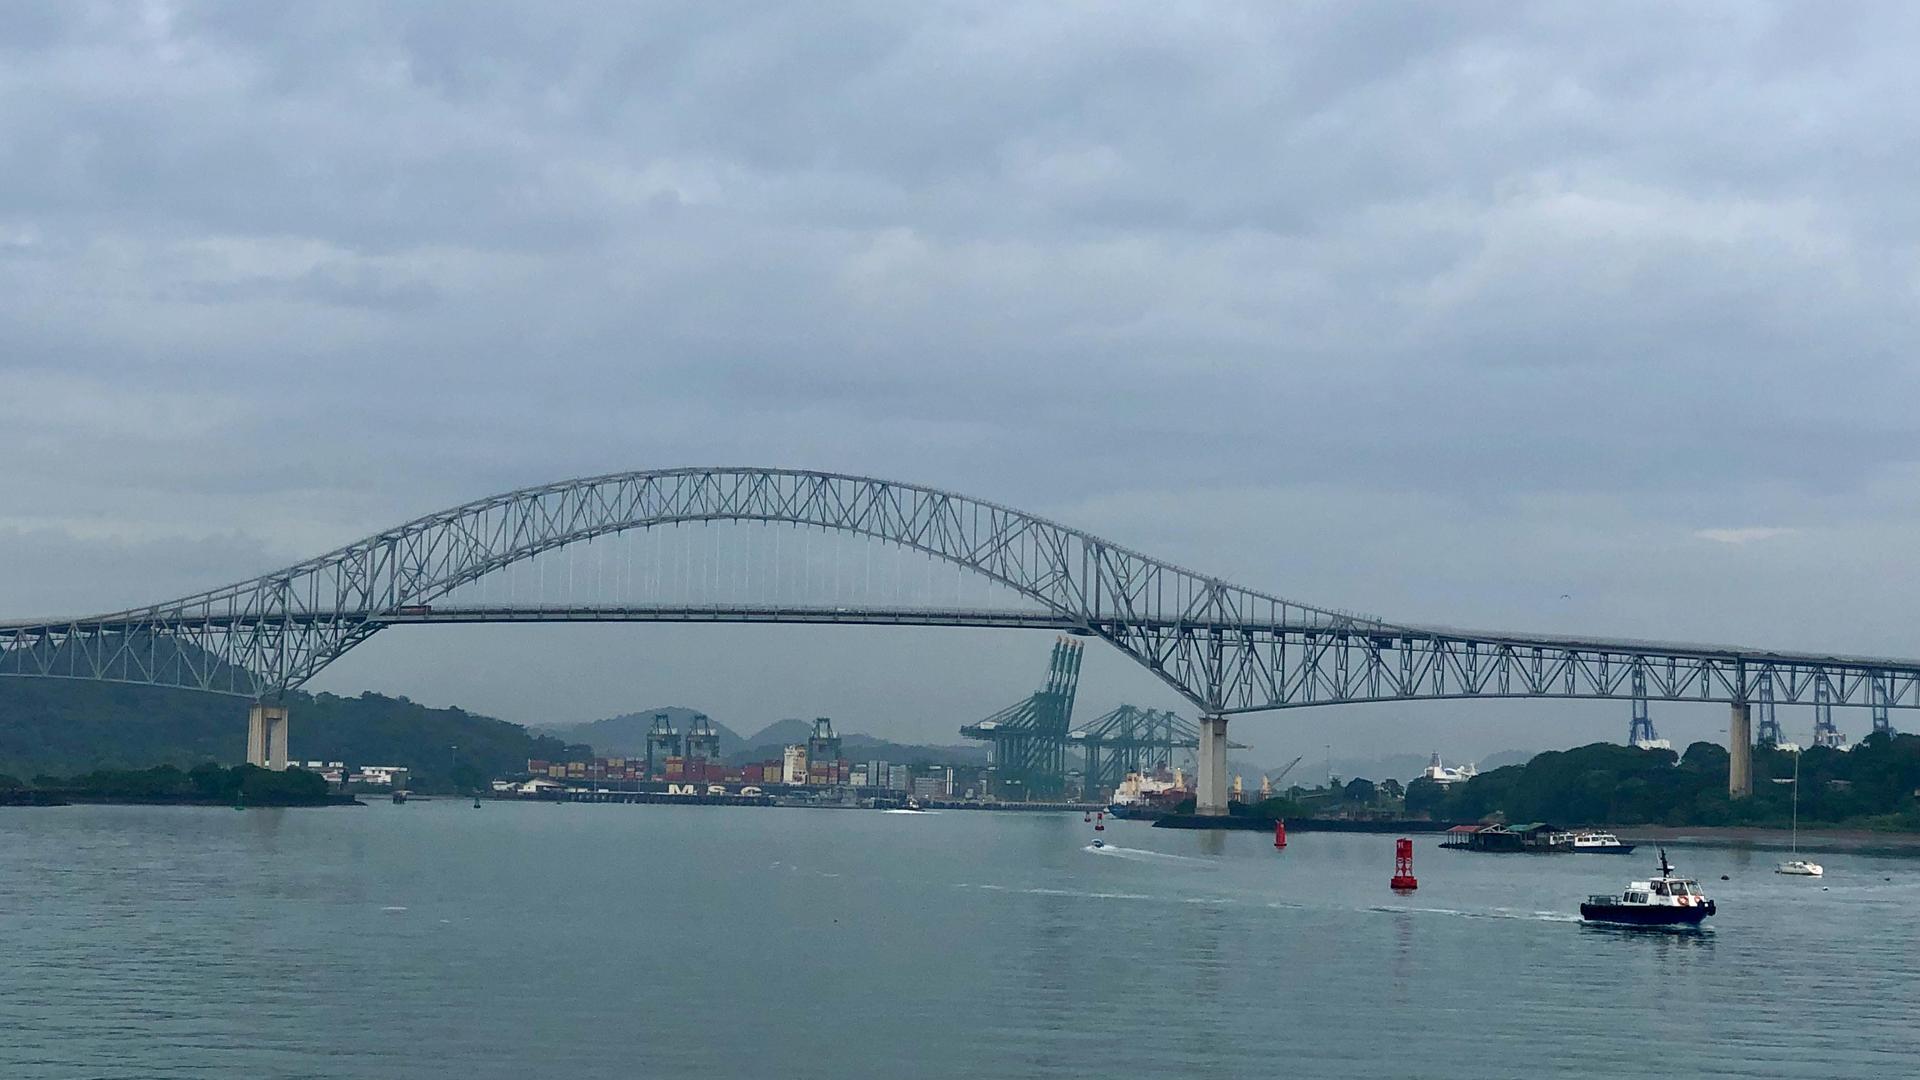 The Bridge of the Americas, located at the Pacific end of the Panama Canal.